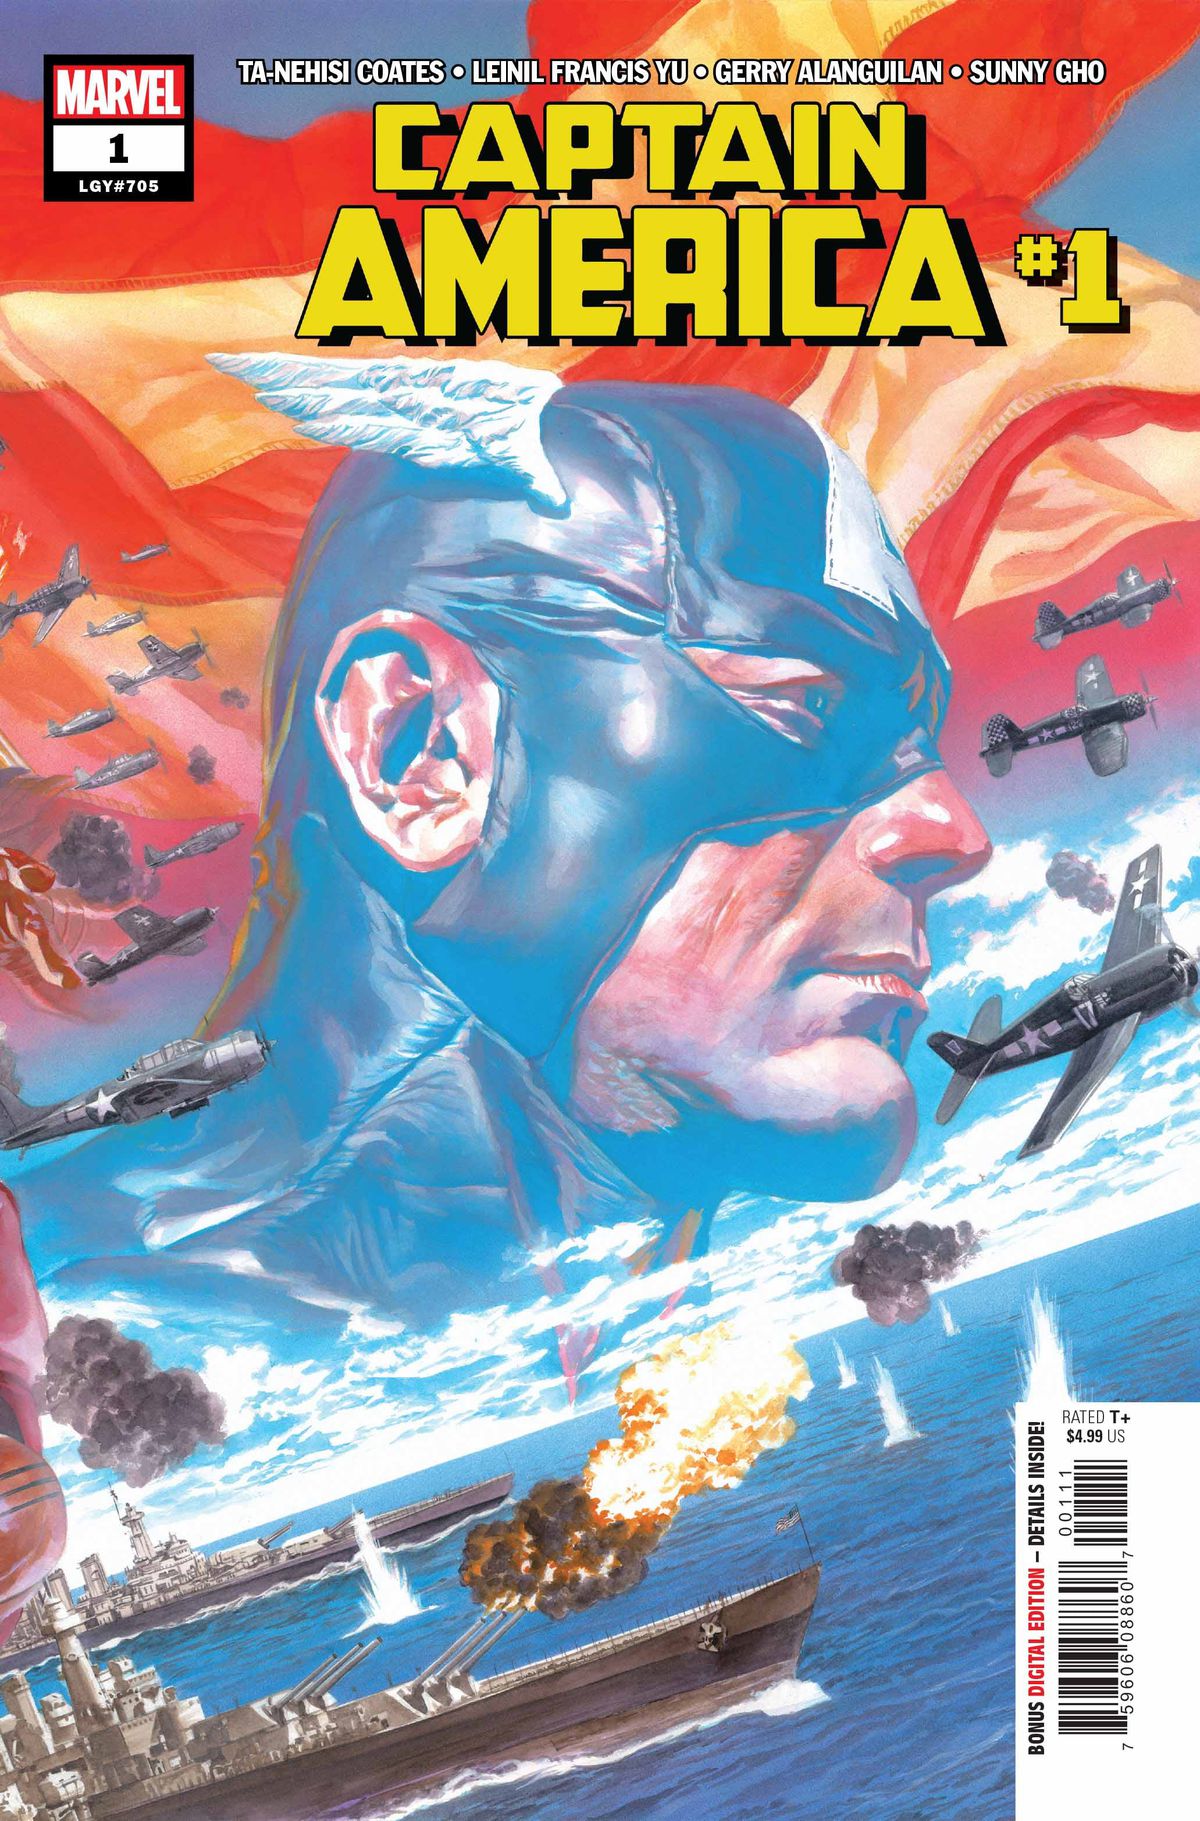 Battleships duel with fighter planes, an image of Captain America and the American flag superimposed, on the cover of Captain America #1, Marvel Comics (2018). 